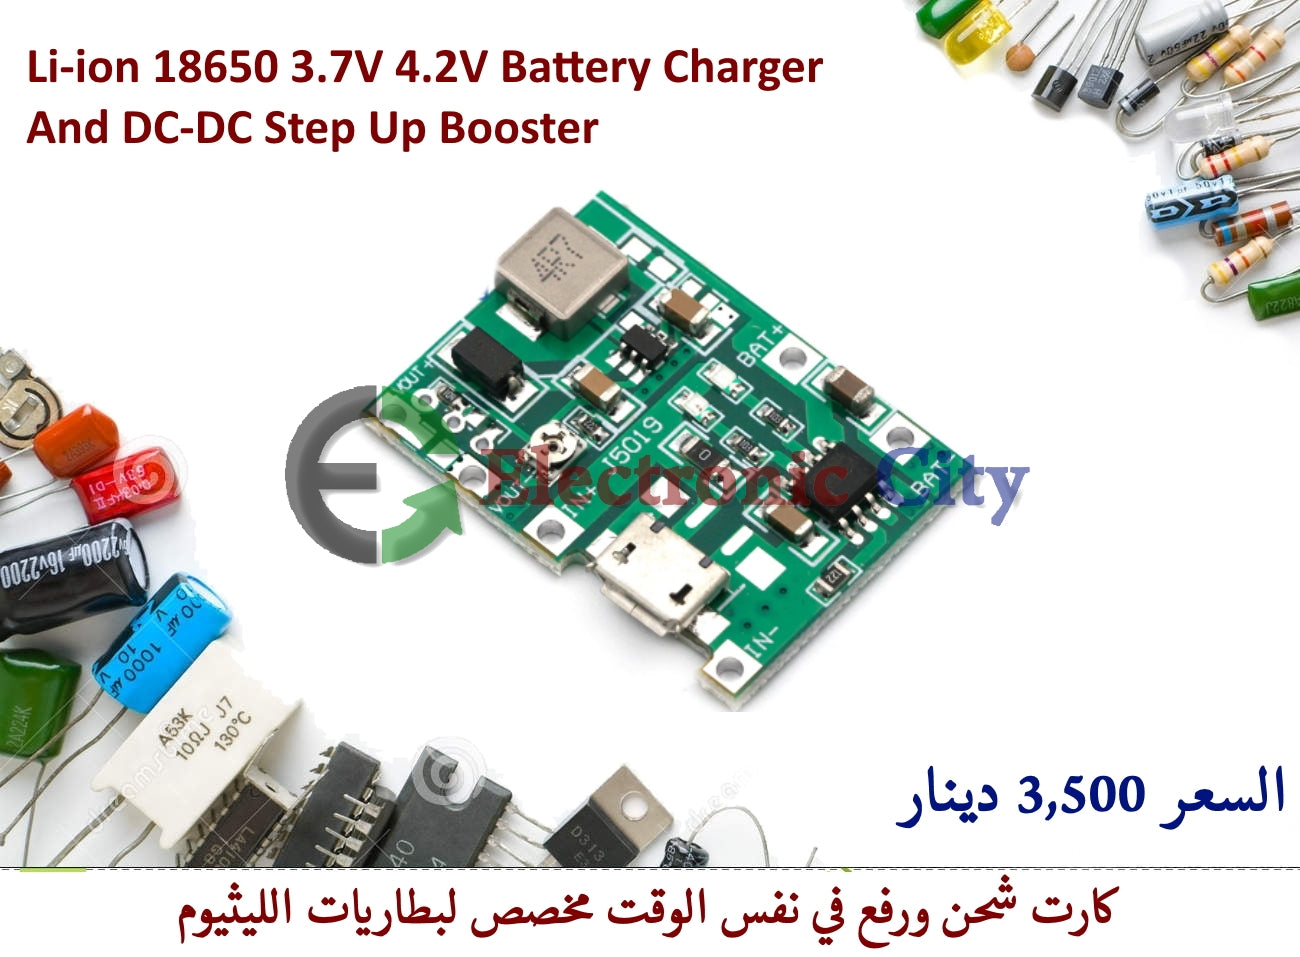 Li-ion 18650 3.7V 4.2V Battery Charger And DC-DC Step Up Booster #G1 011016